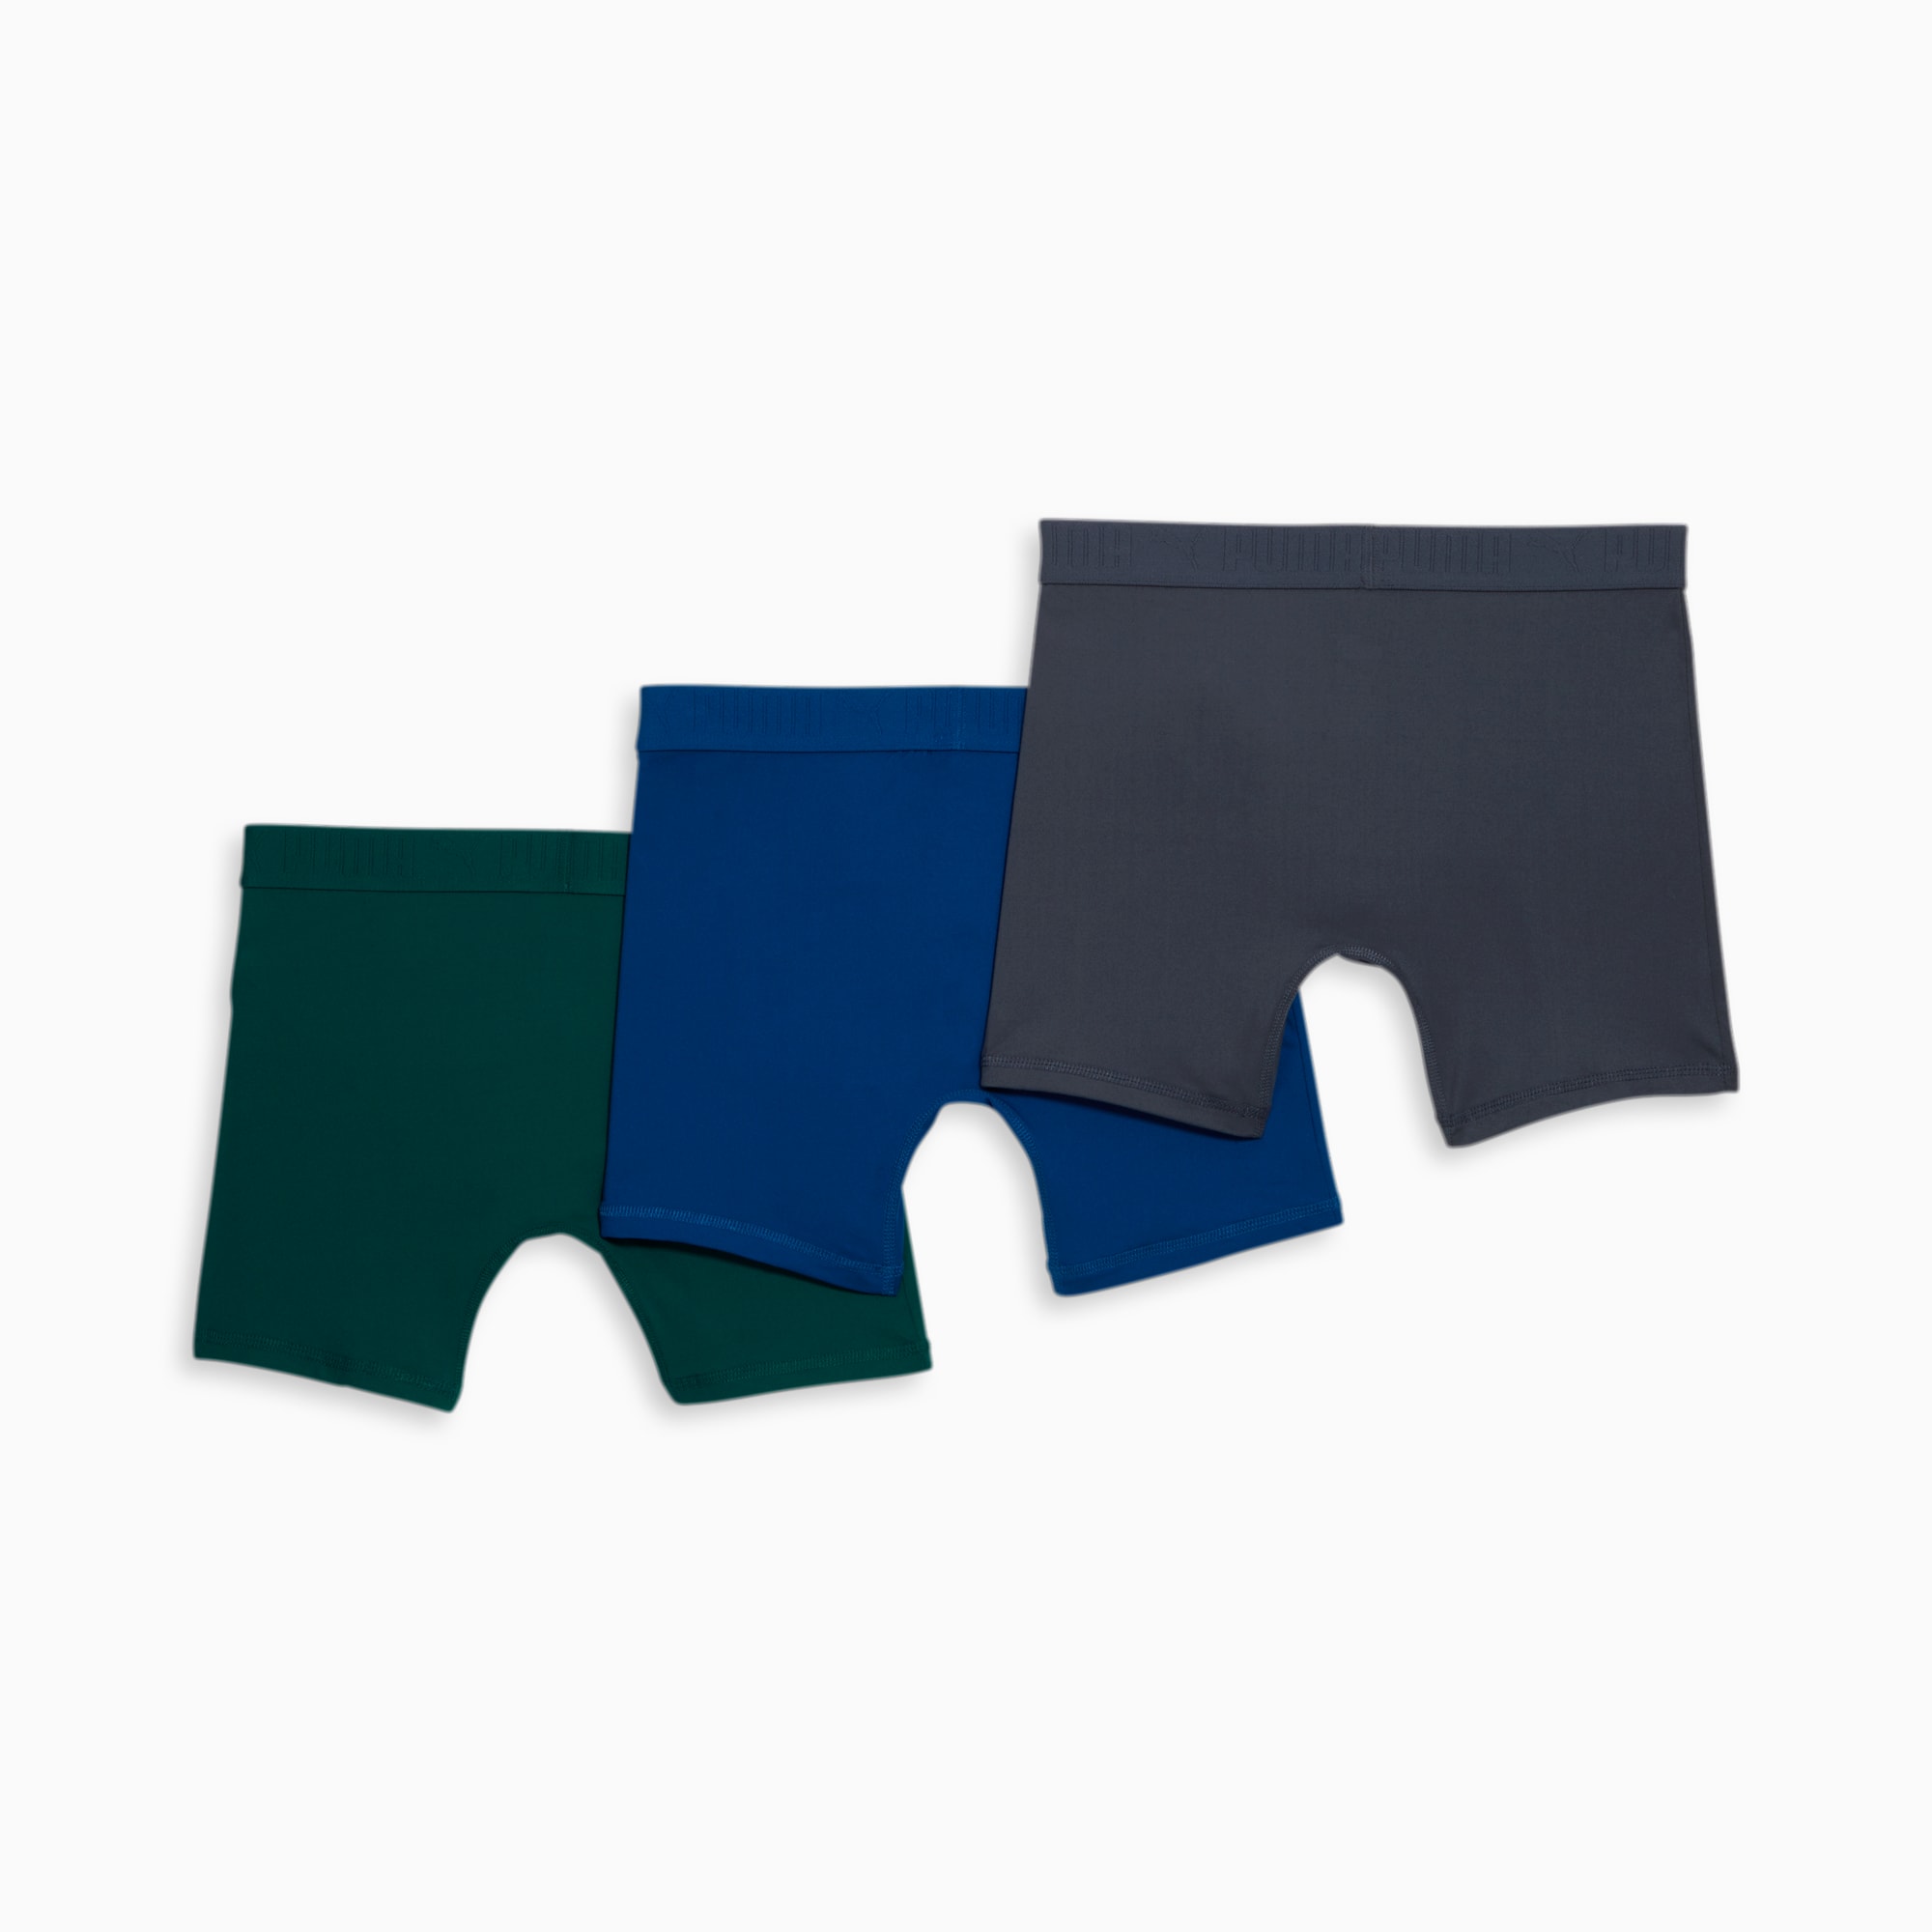 Puma Boxers - 2-pack - Blue » Always Cheap Shipping